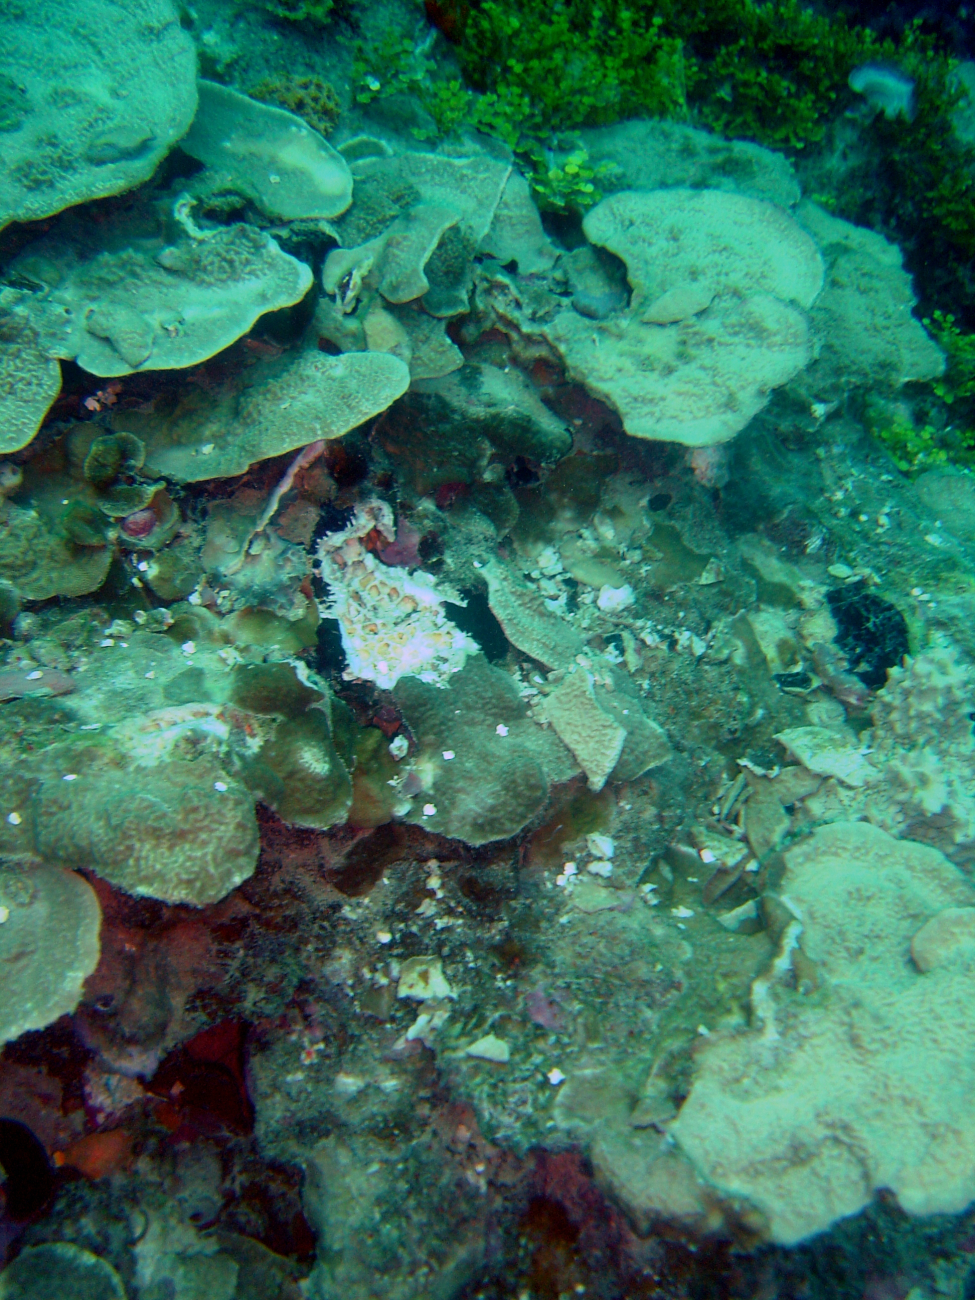 Note broken coral where anchor chain had overlain coral reef